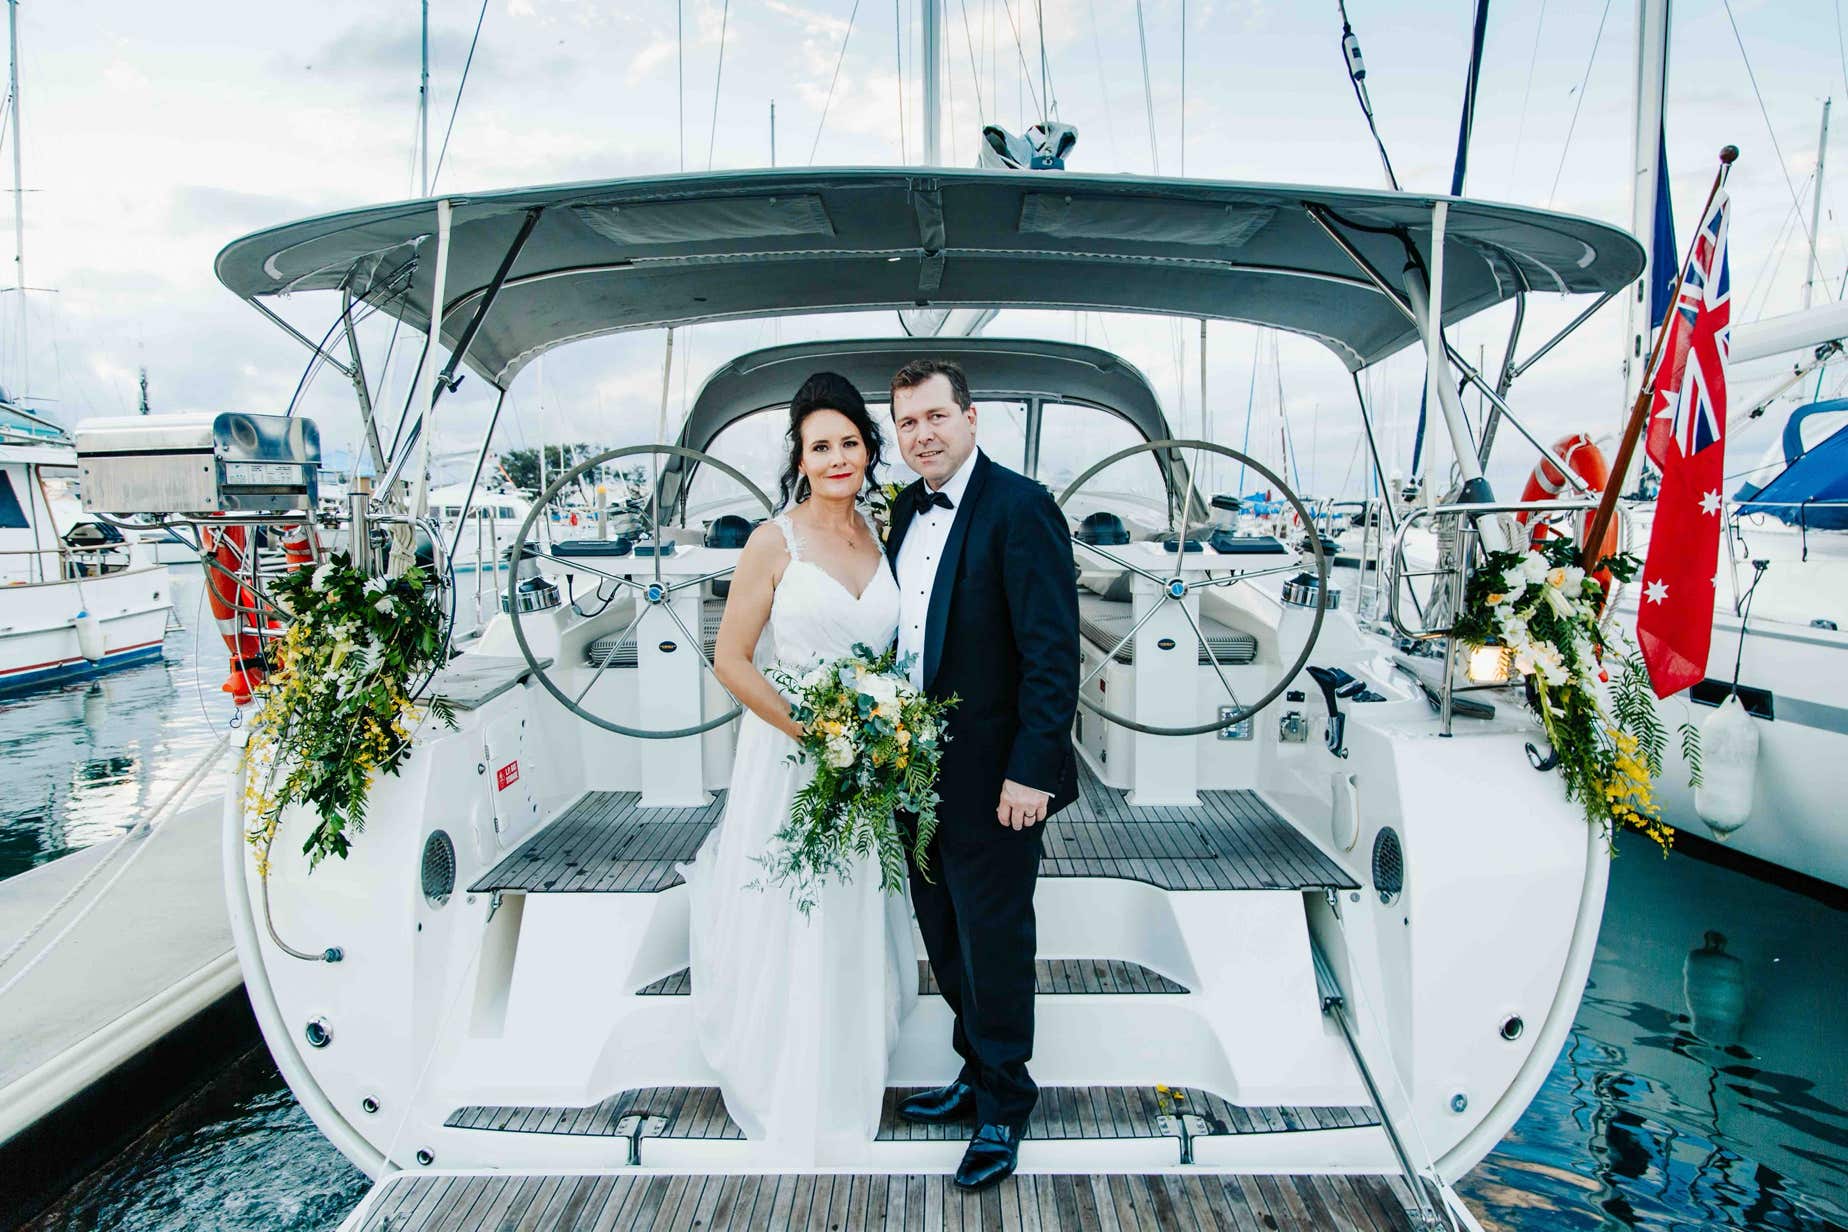 Wedding reception arrival on a private yacht charter on Curlew Escape, Moreton Bay, Brisbane.